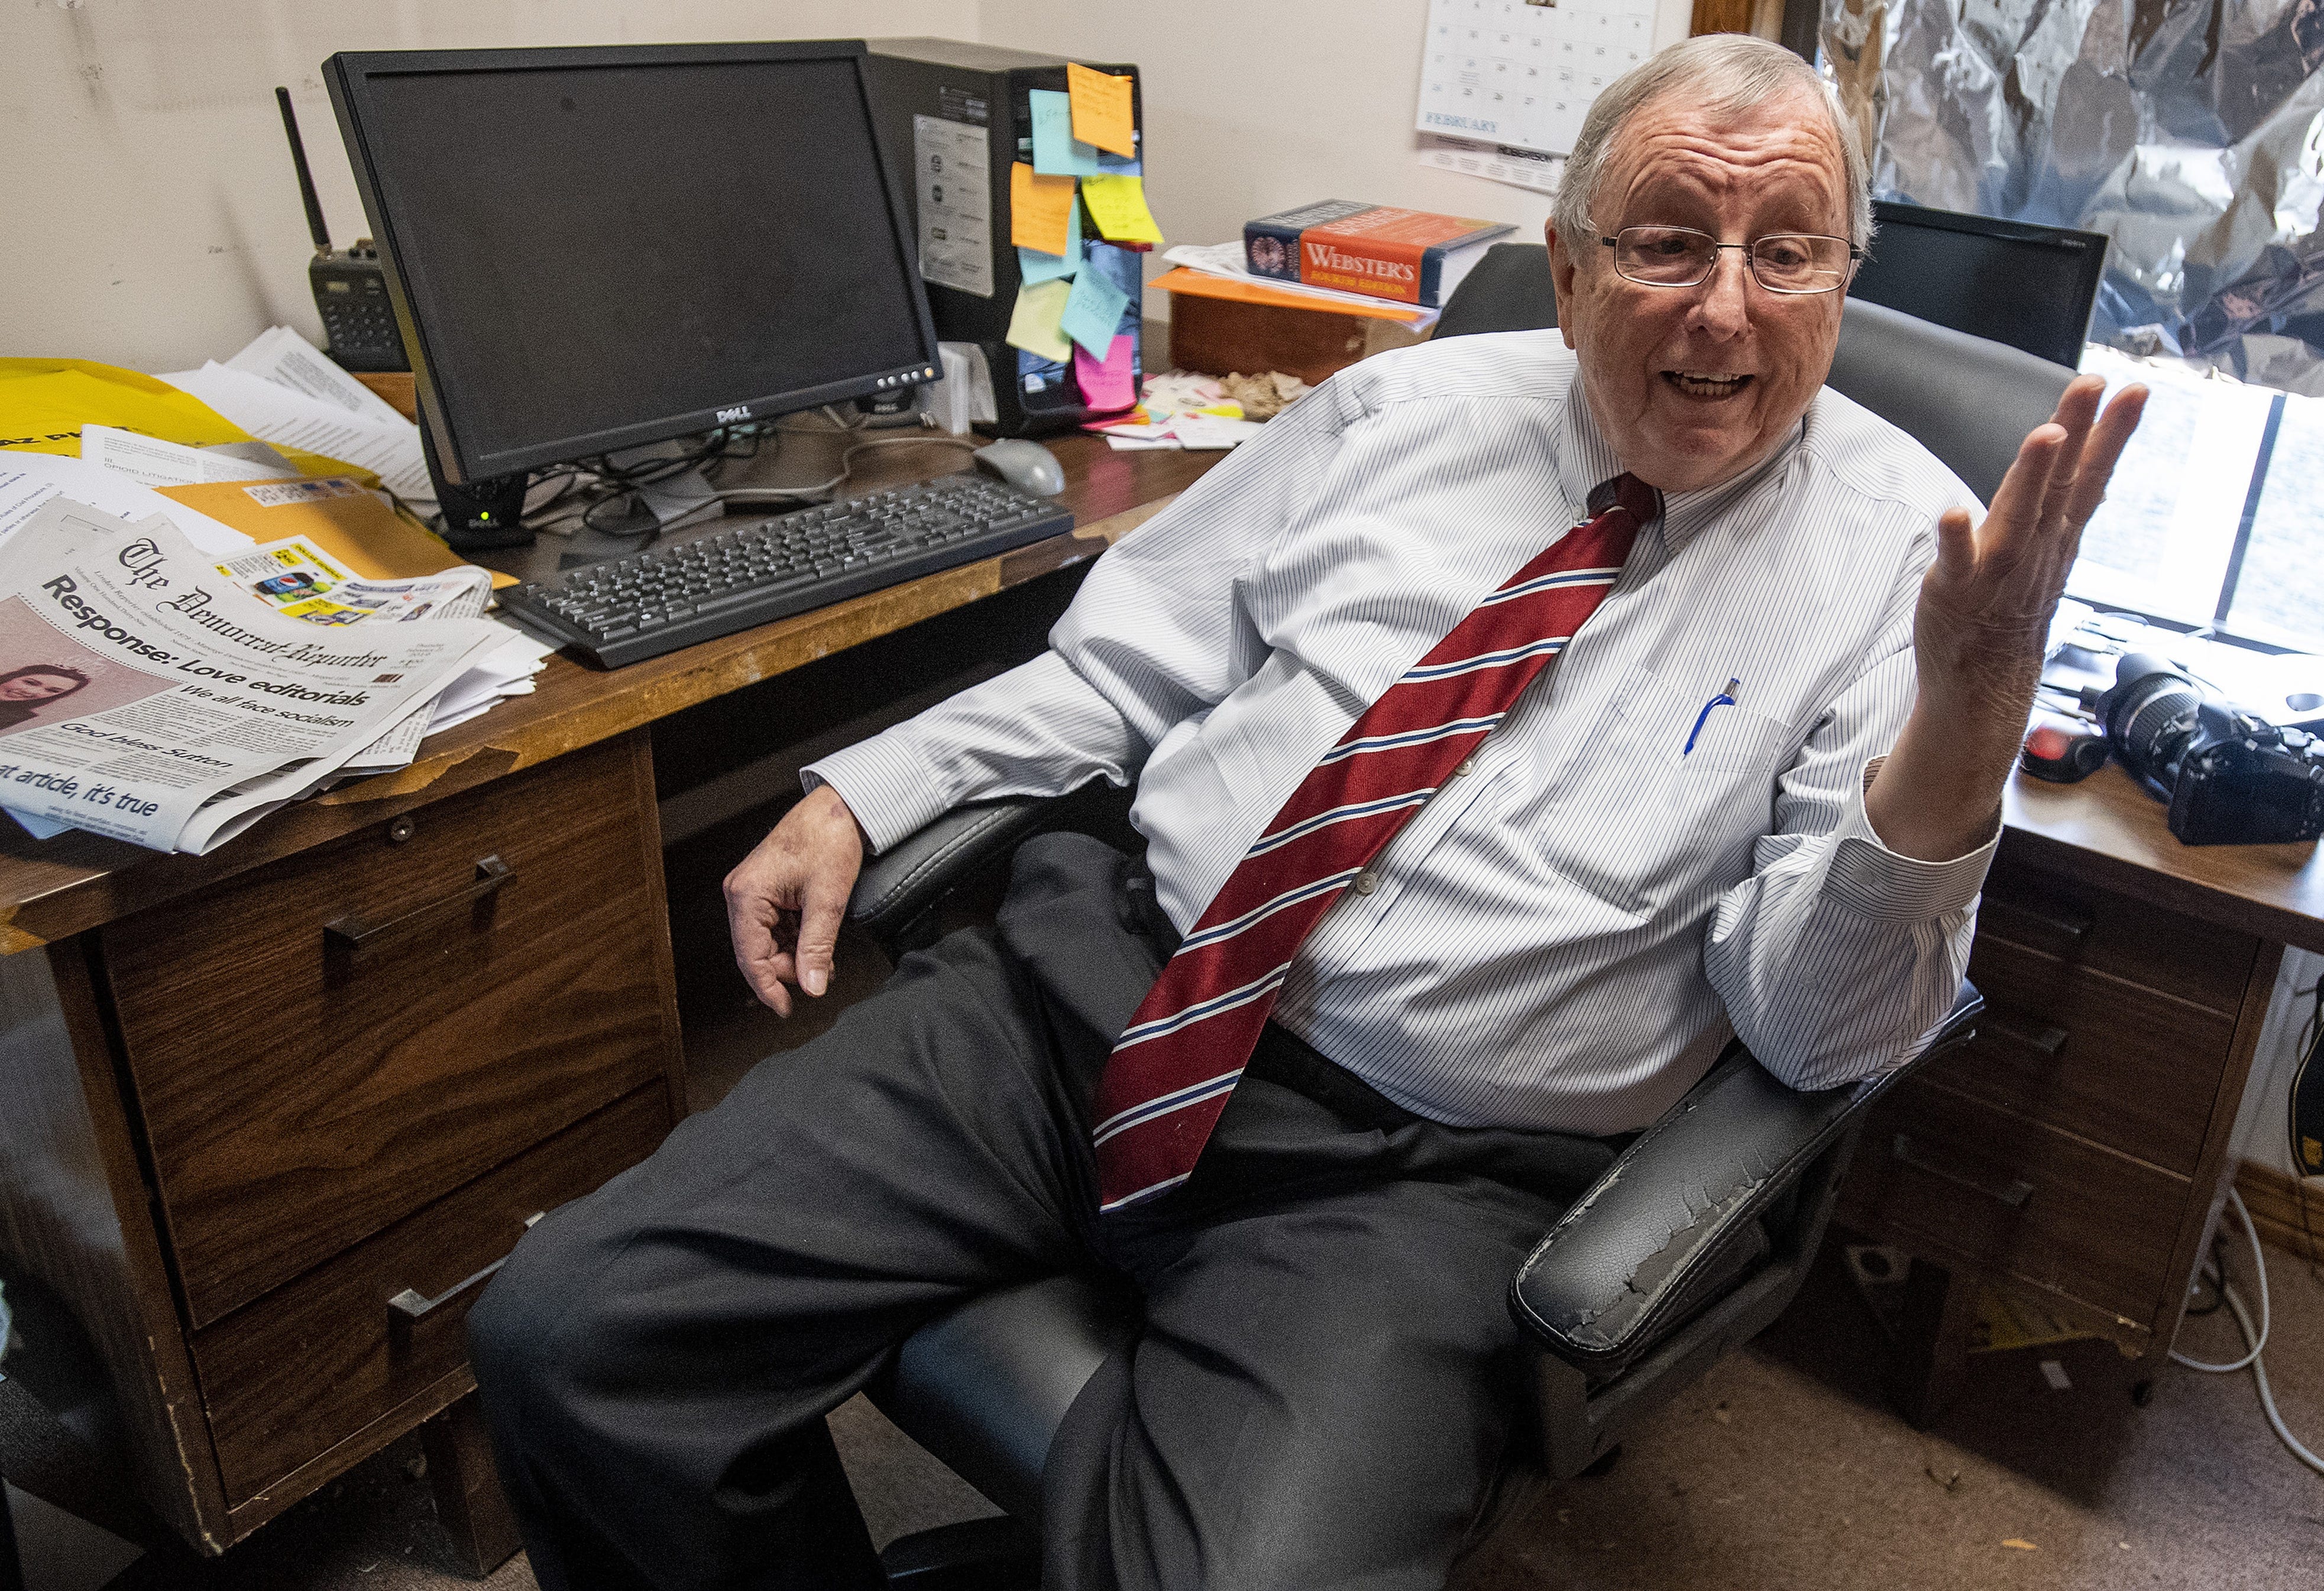 Goodloe Sutton, publisher of the Democrat-Reporter in Linden, Ala., speaks during an interview at the newspaper's office on Feb. 21, 2019. The Democrat-Reporter announced Sutton was removed from his position after advocating for a revival of the Ku Klux Klan in a newspaper editorial.